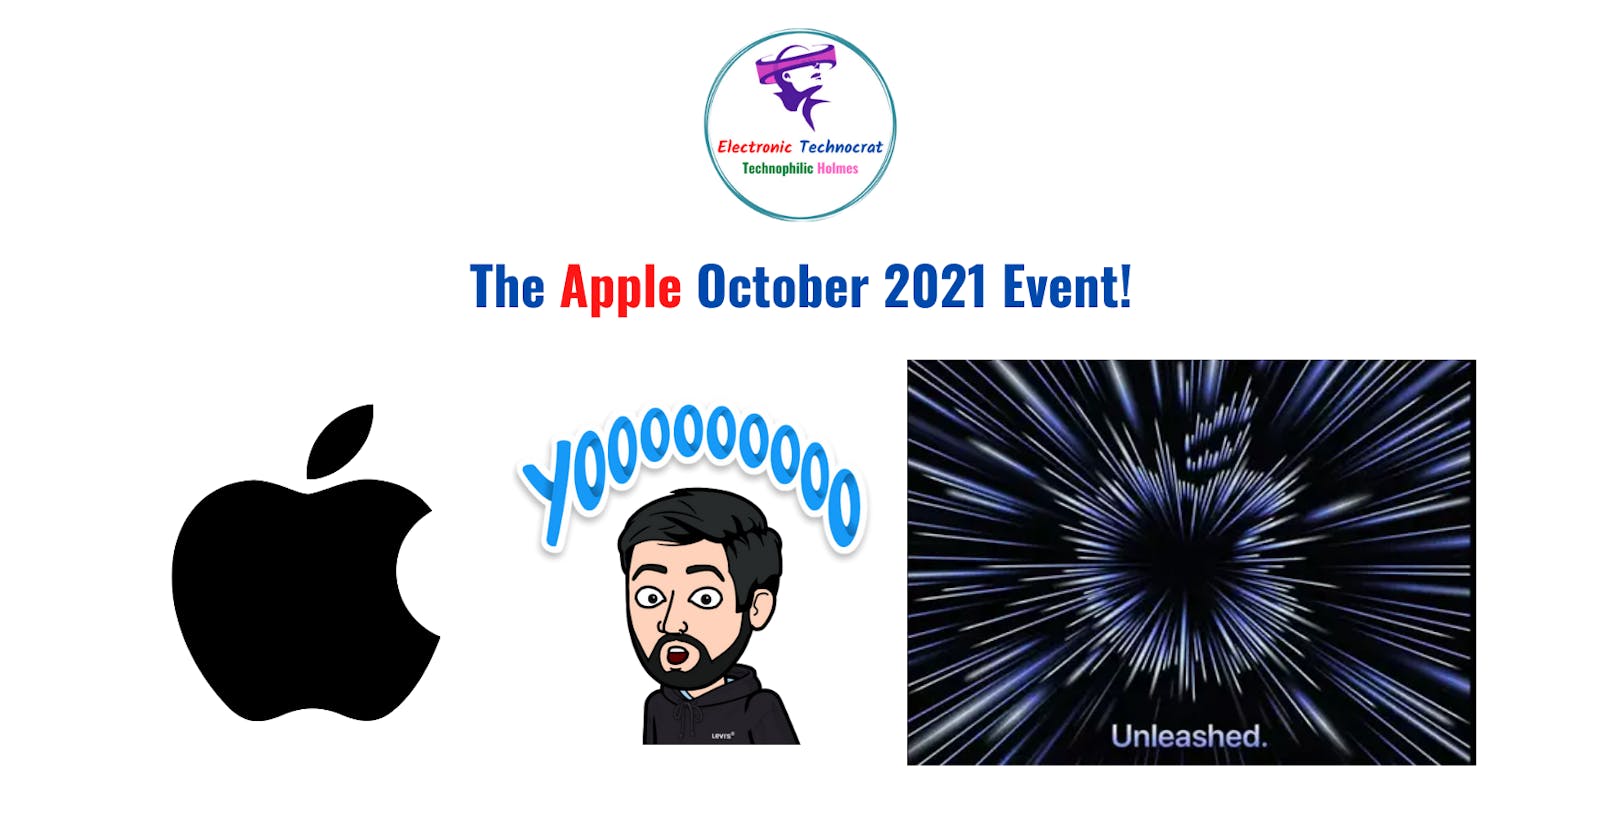 The Apple October 2021 Event!